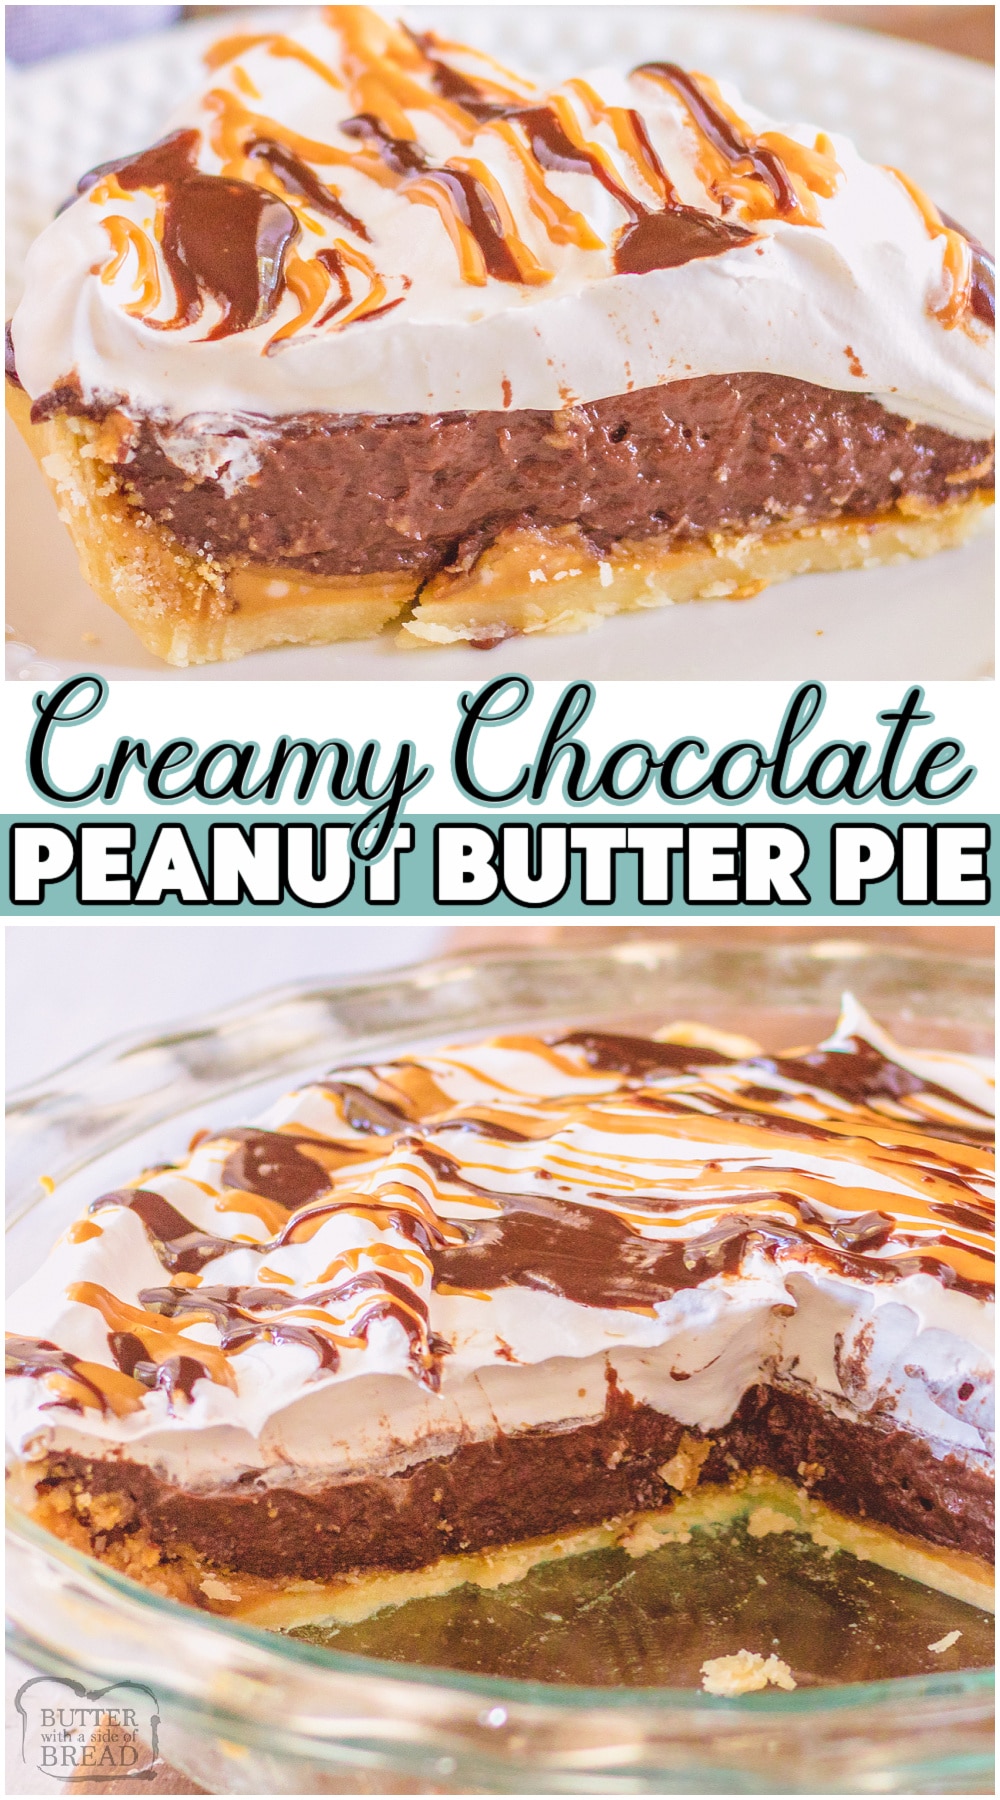 Chocolate peanut butter pie made from scratch with layers of chocolate and peanut butter in a flaky pie crust, topped with sweet whipped cream. The ultimate chocolate + peanut butter combination in a creamy pie that's easy to make! #pie #chocolate #peanutbutter #chocolatecream #homemade #easyrecipe from BUTTER WITH A SIDE OF BREAD